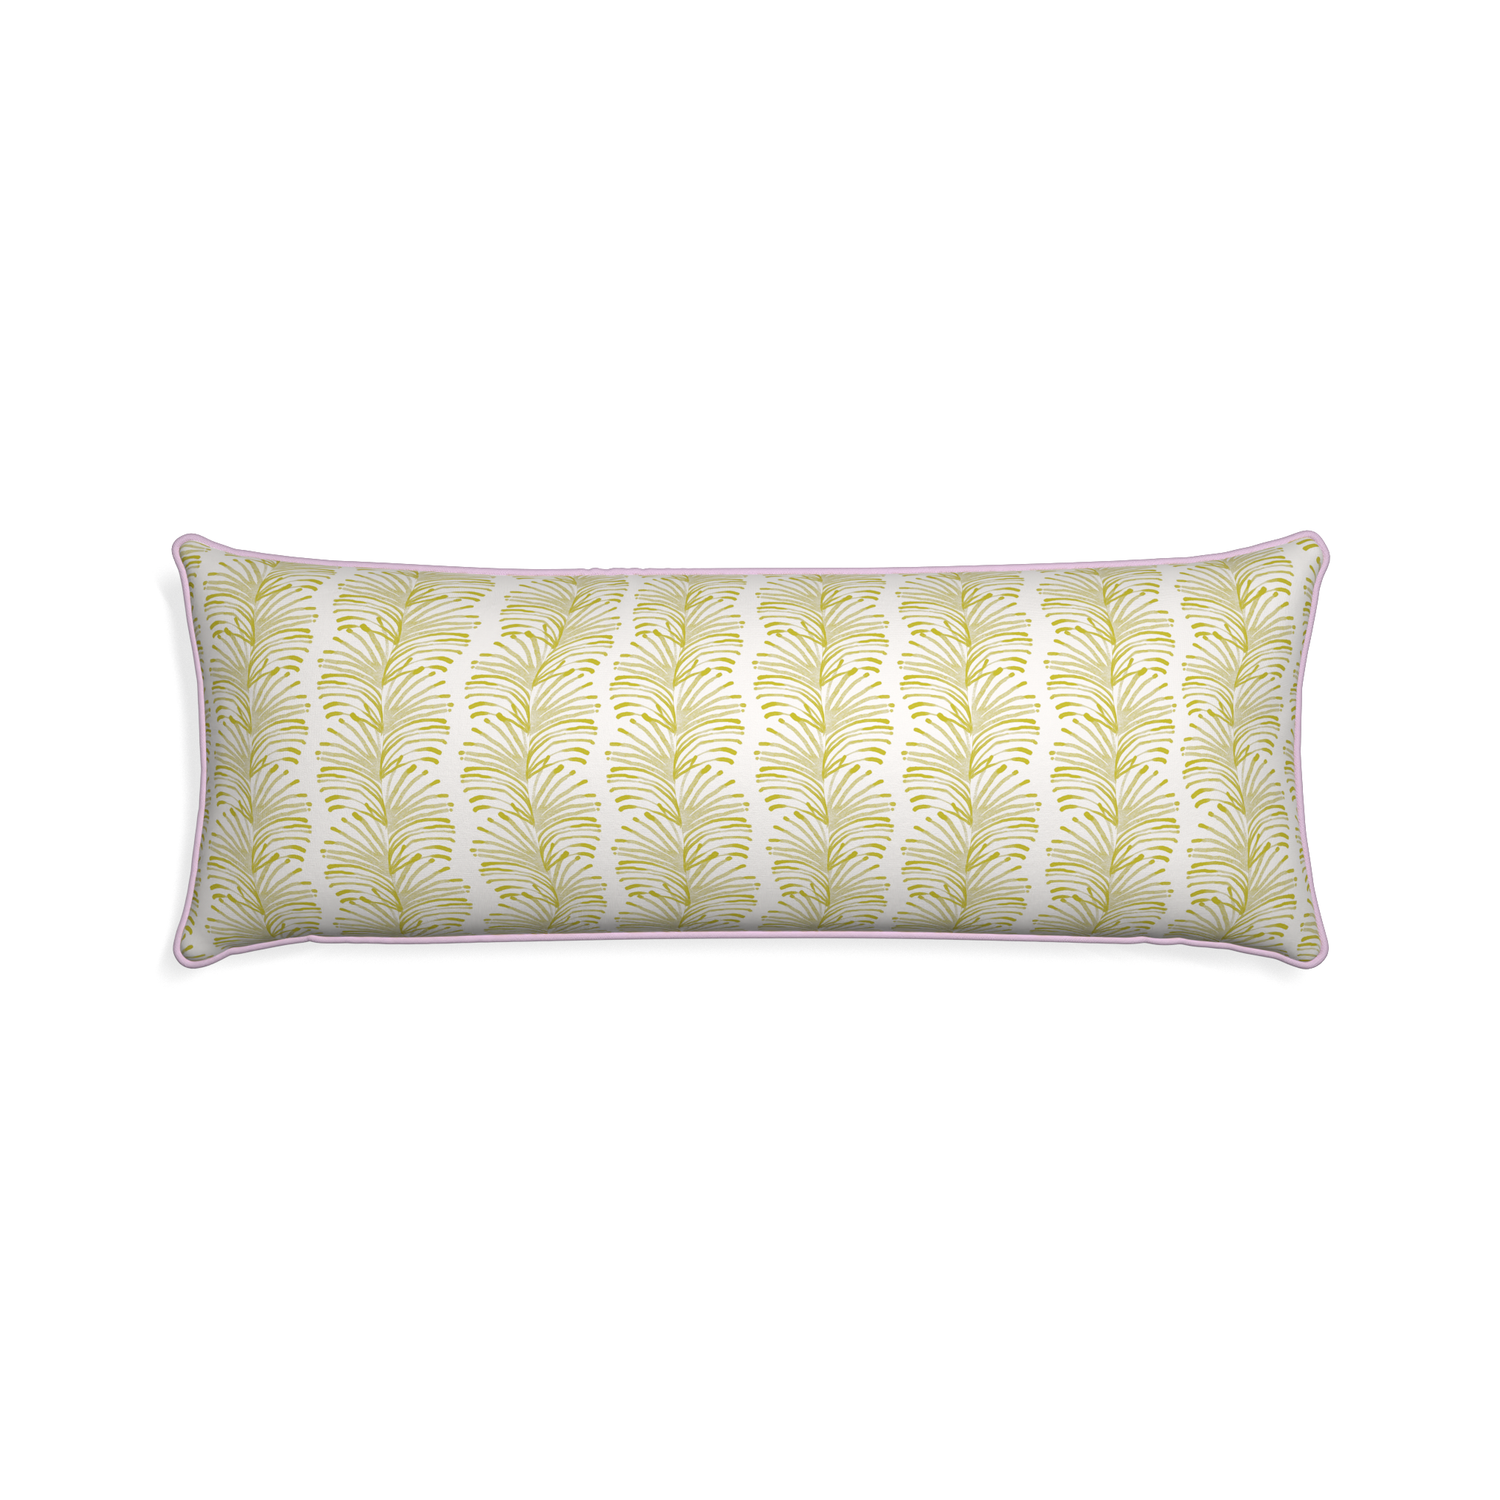 Xl-lumbar emma chartreuse custom yellow stripe chartreusepillow with l piping on white background